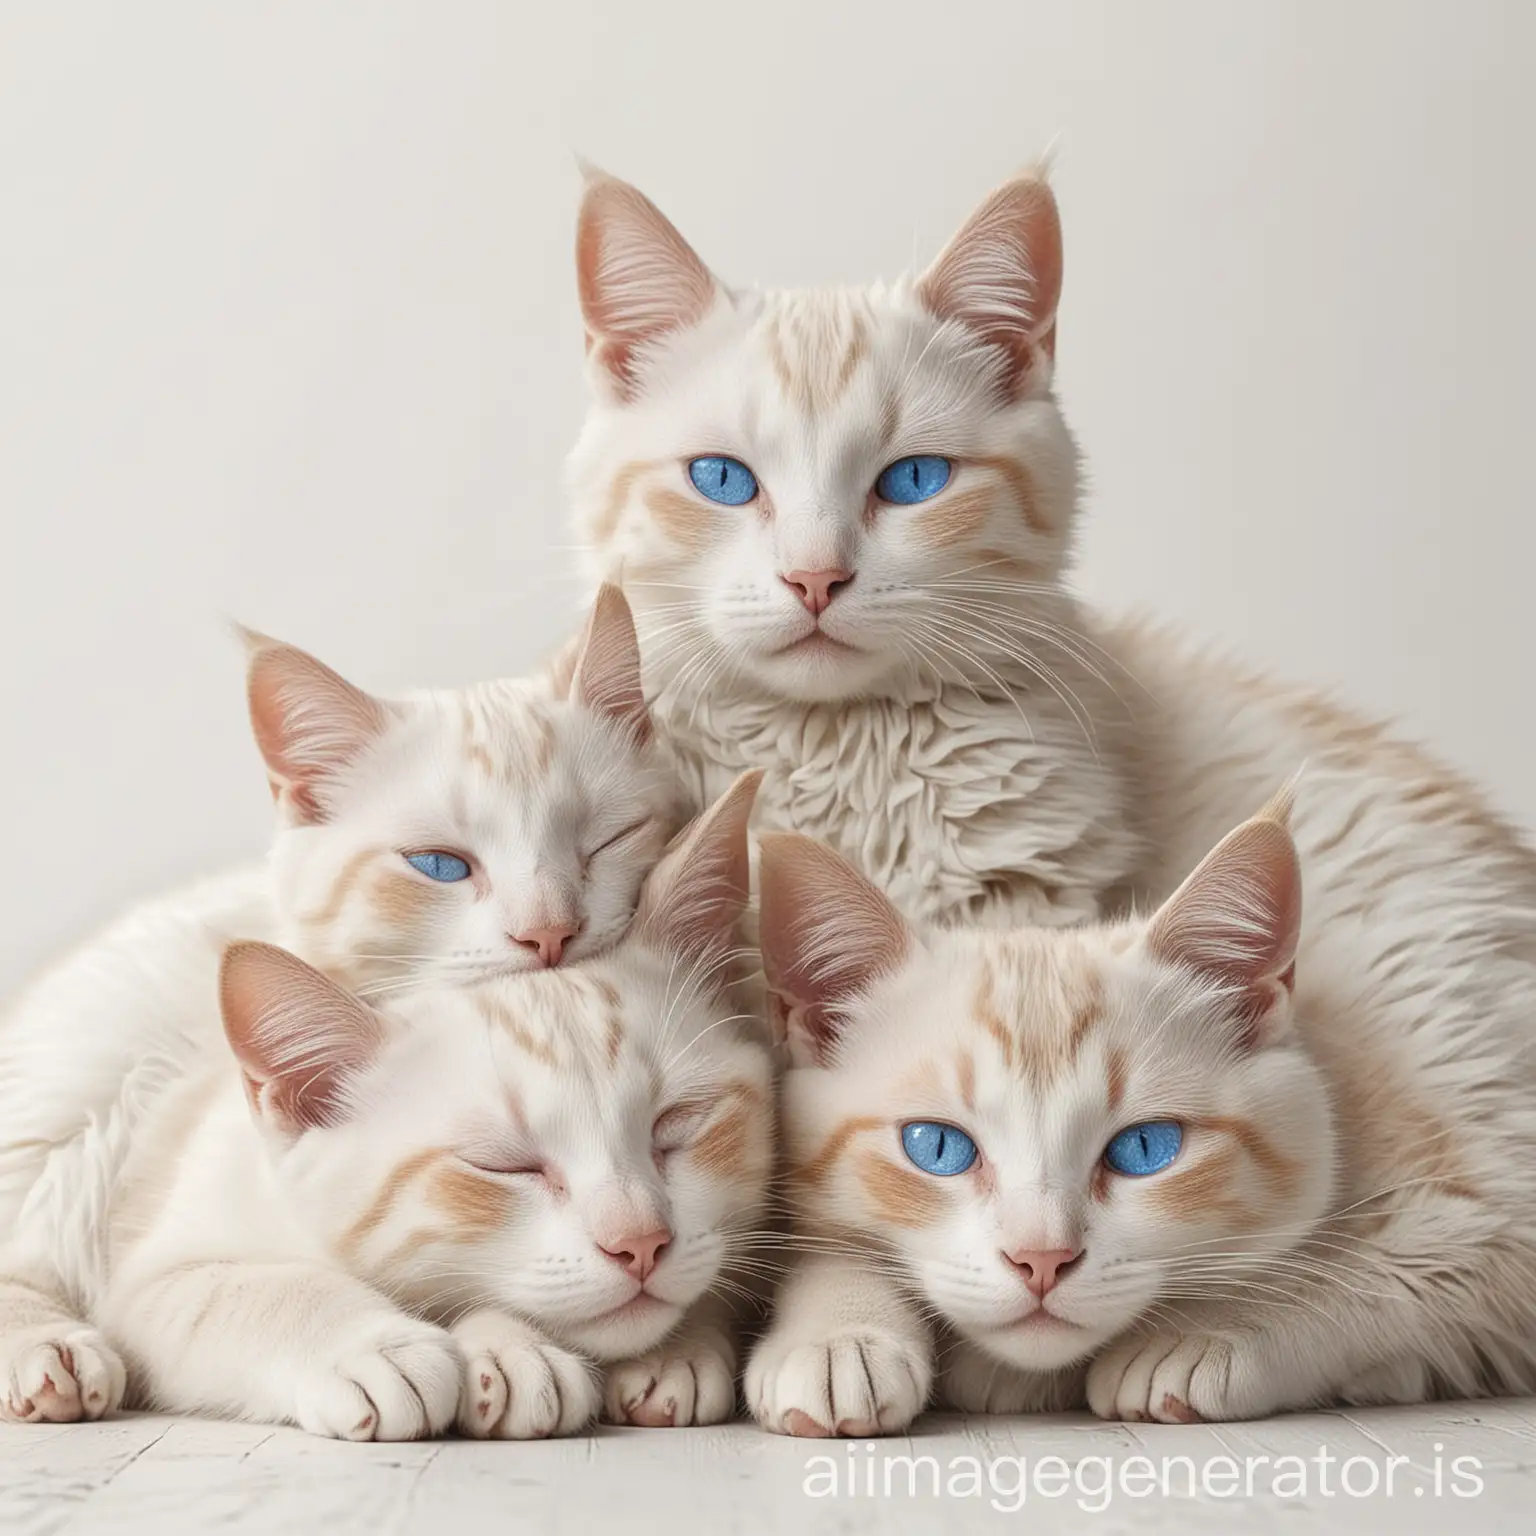 Realistic-BlueEyed-Cats-Sleeping-Against-White-Wall